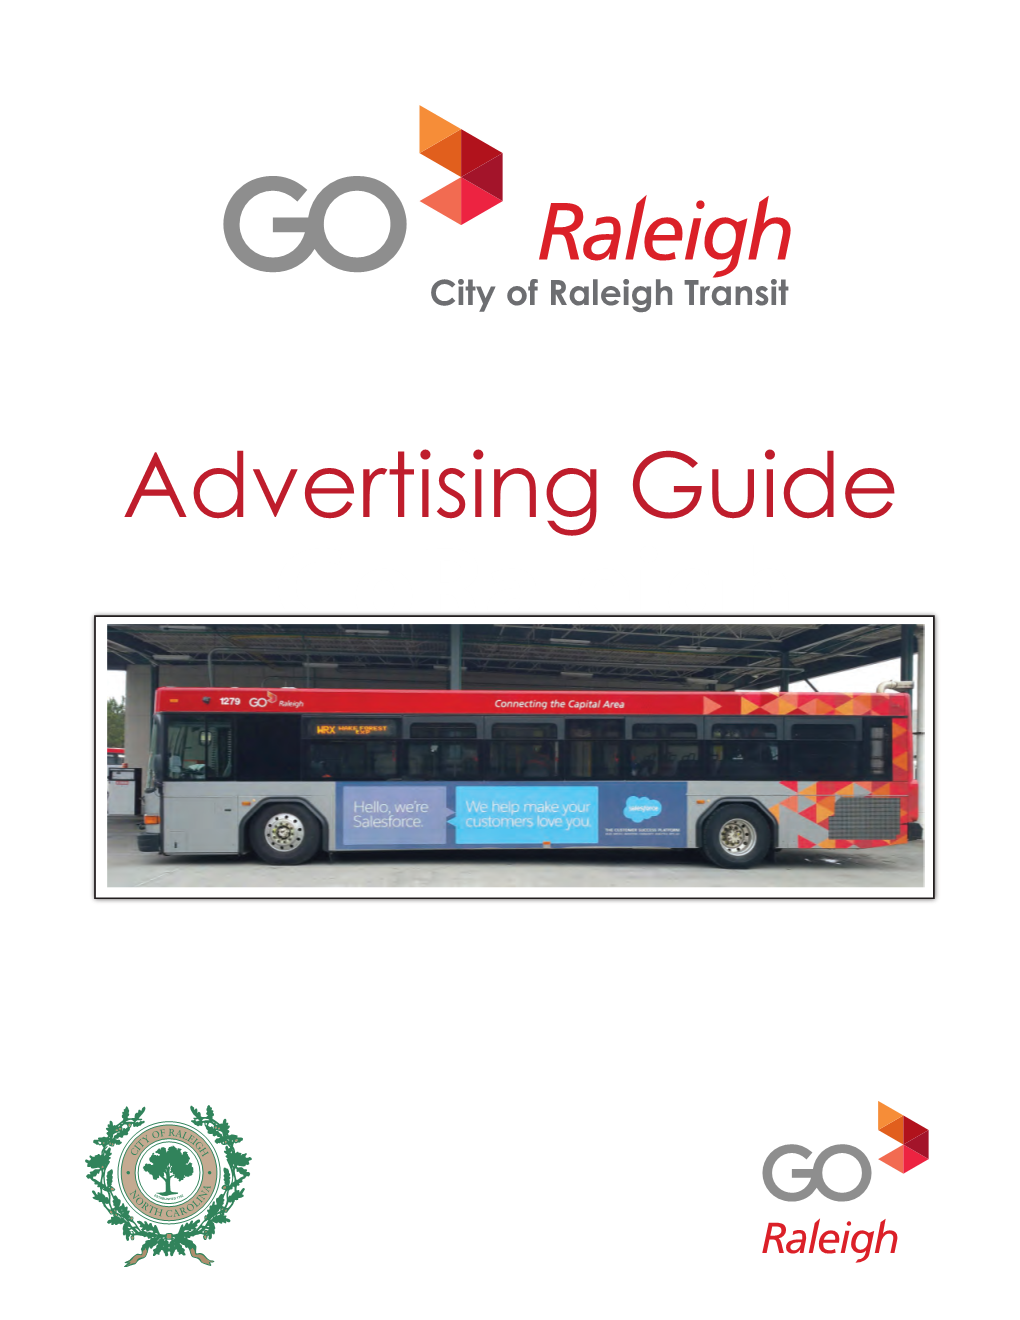 Goraleigh Bus Advertising Guide 2019-2020 Rates